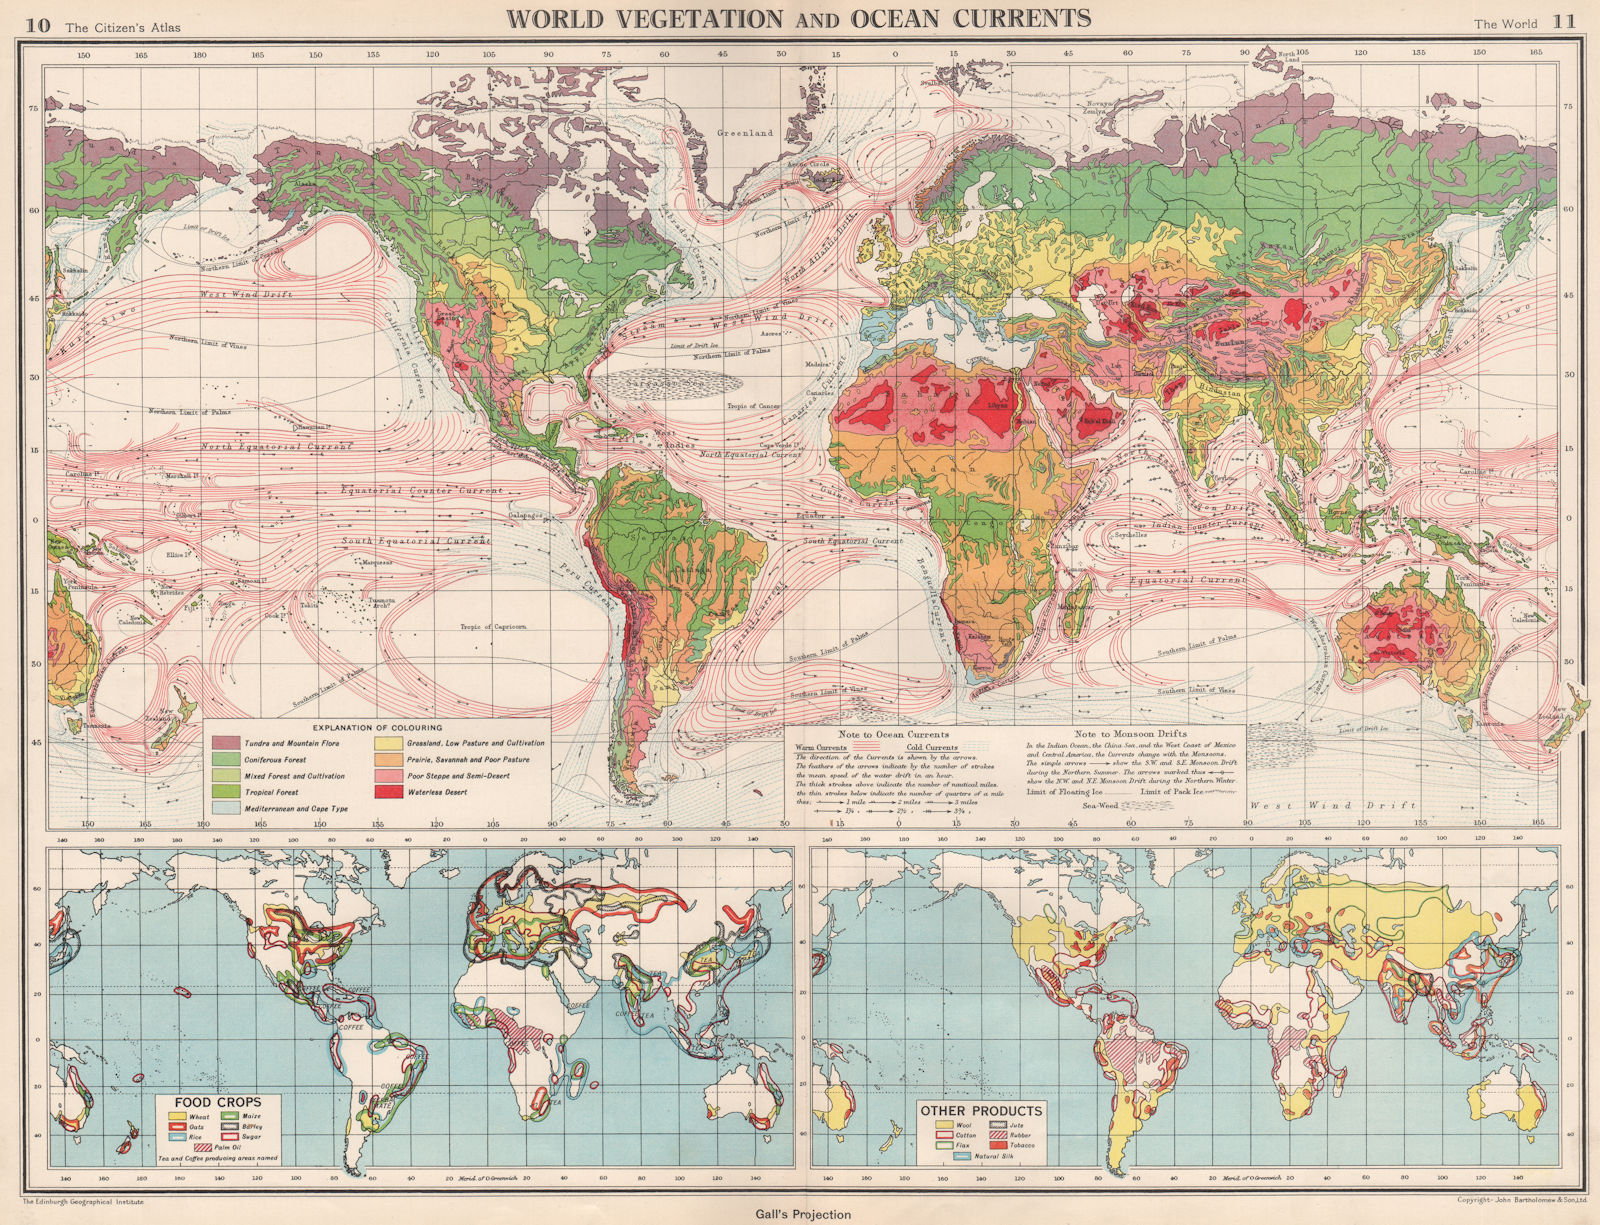 WORLD.Vegetation & Ocean Currents.Food crops.Agricultural commodities 1952 map